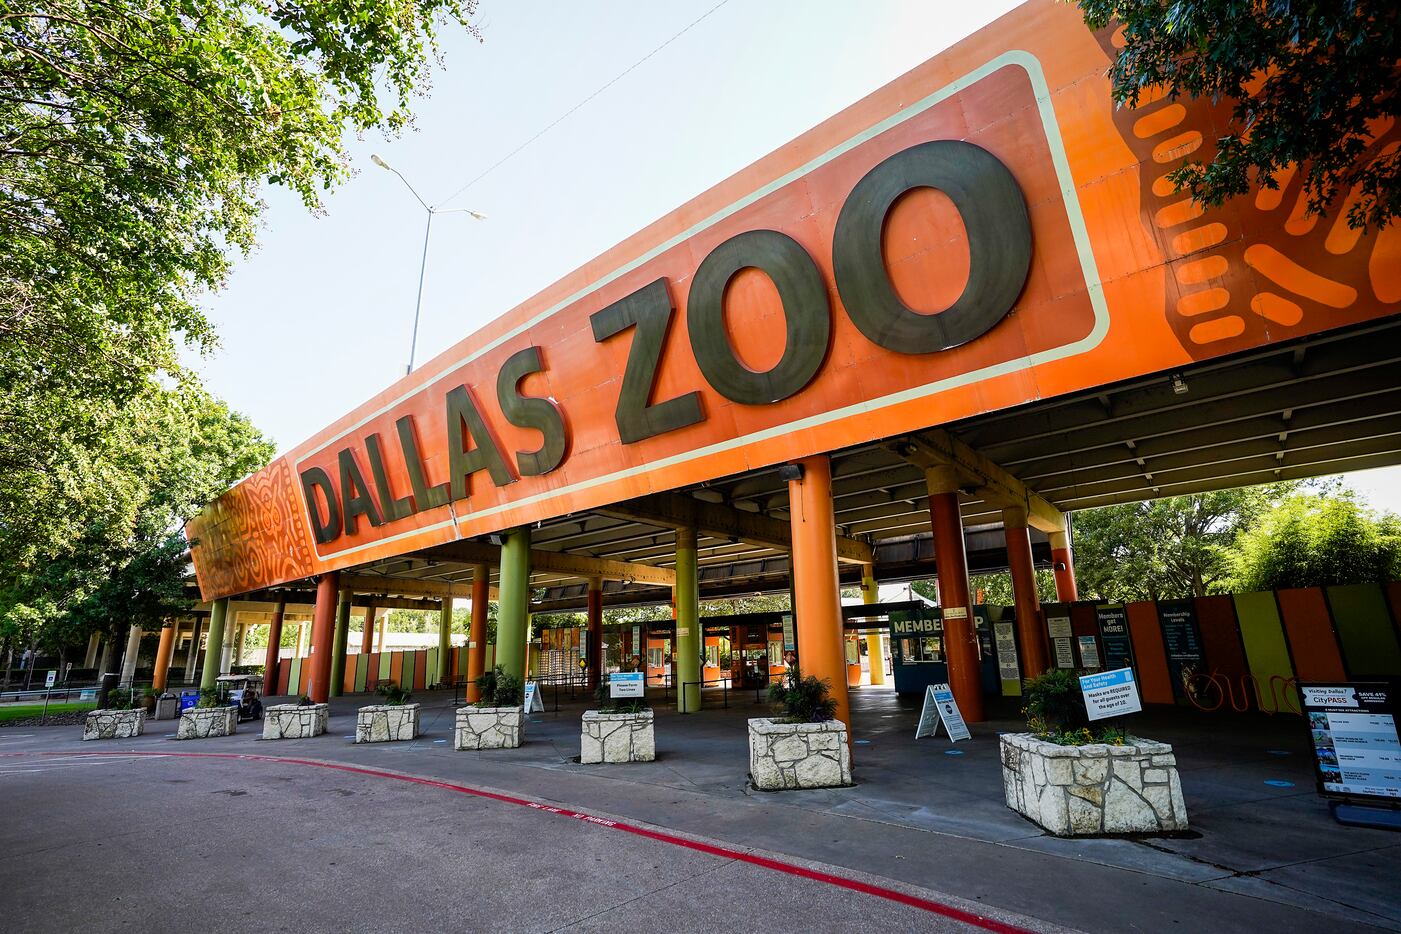 Dallas Zoo - Business in the front, party in the back.